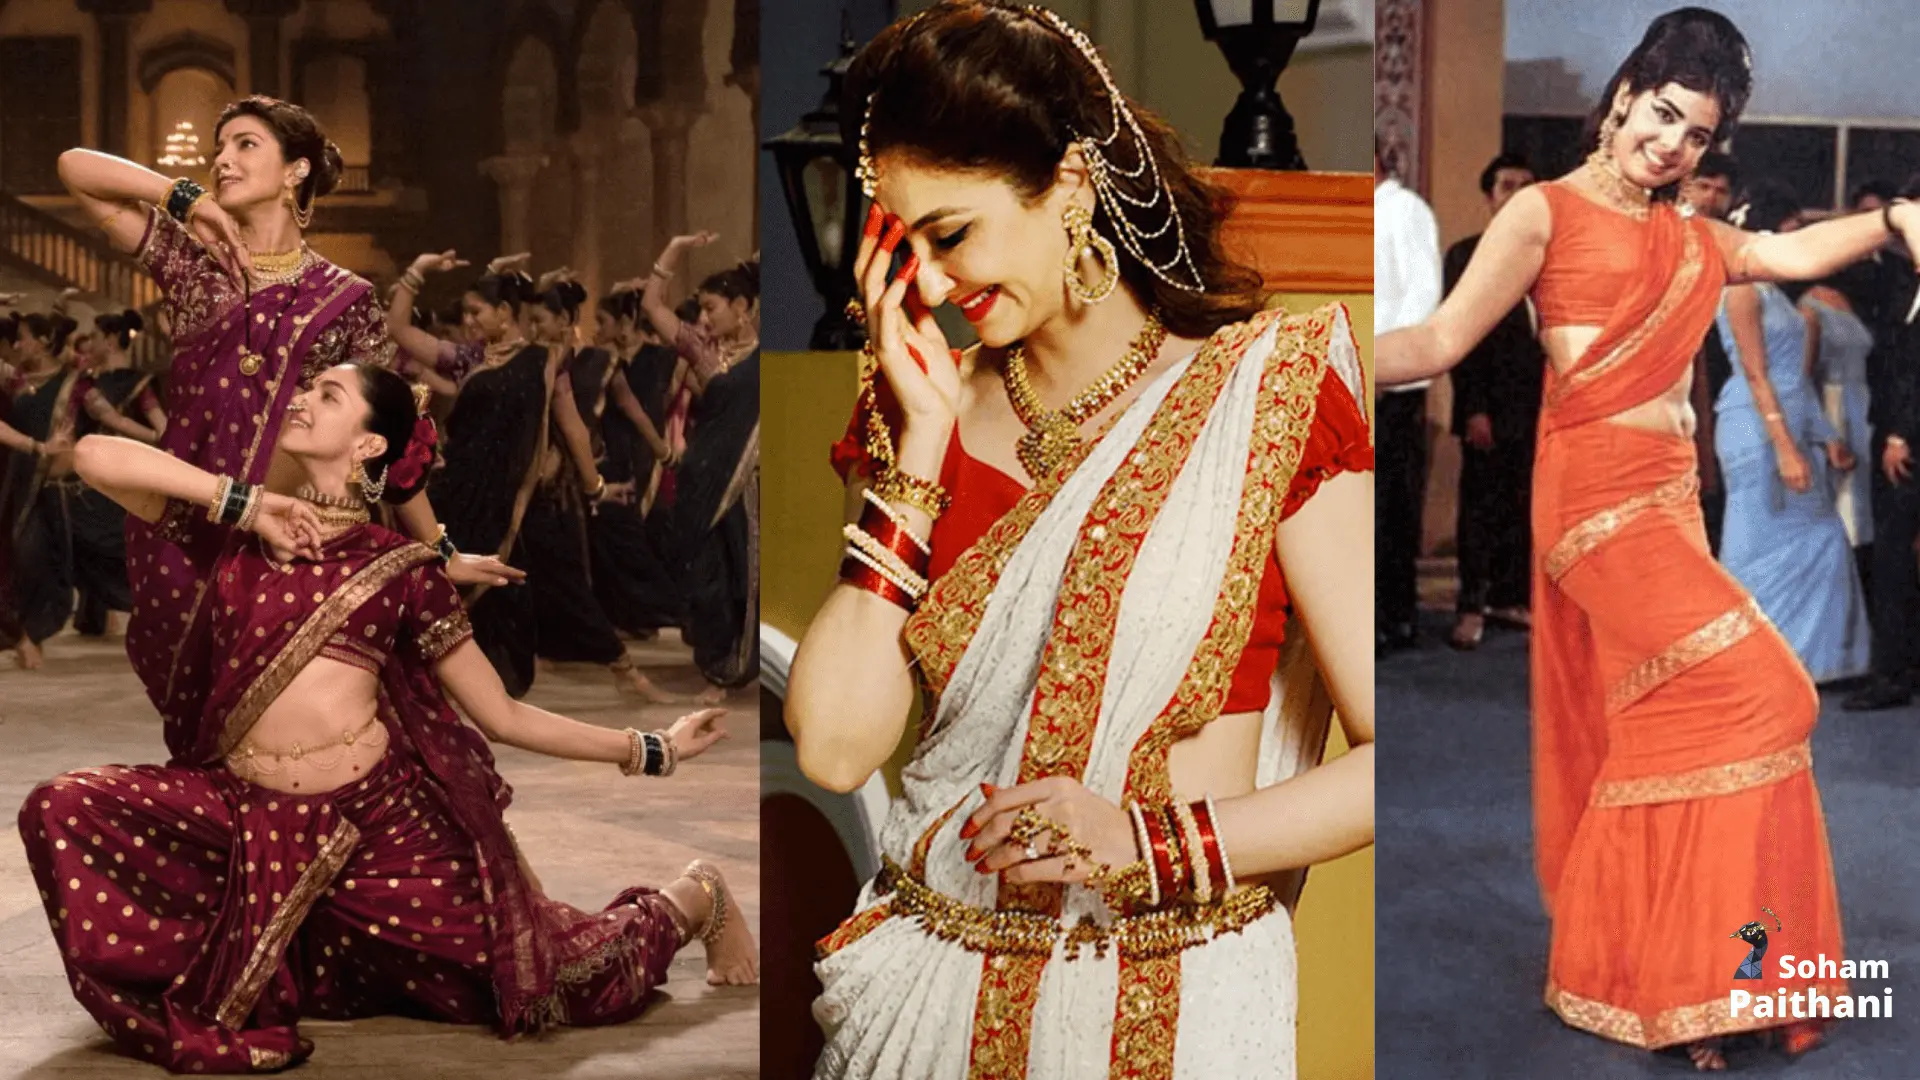 Belted sari trend has been embraced by the best of Bollywood